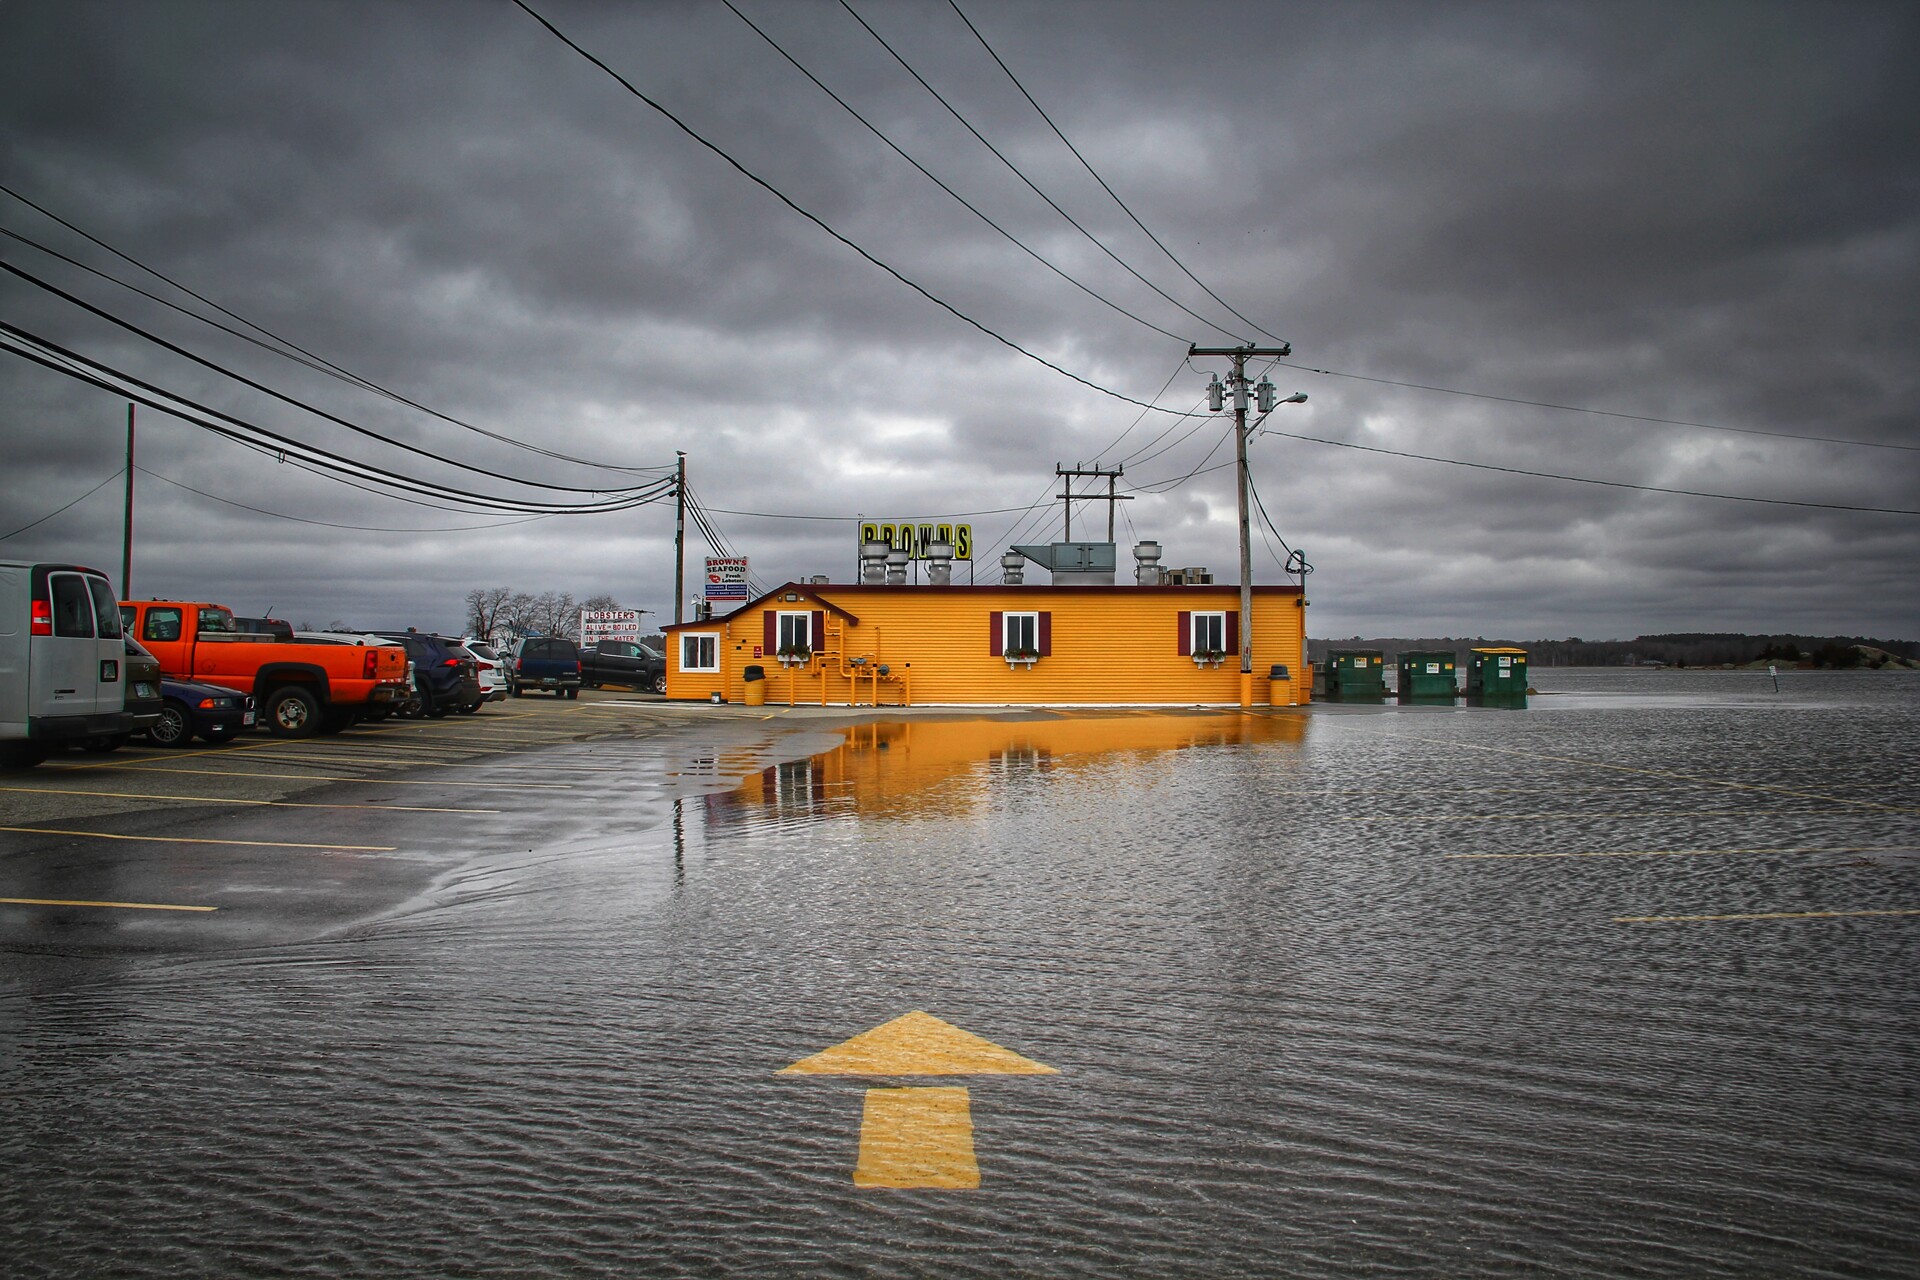 A grey cloudy sky over a bright yellow building surrounded by a flooded parking lot with a big yellow painted arrow.